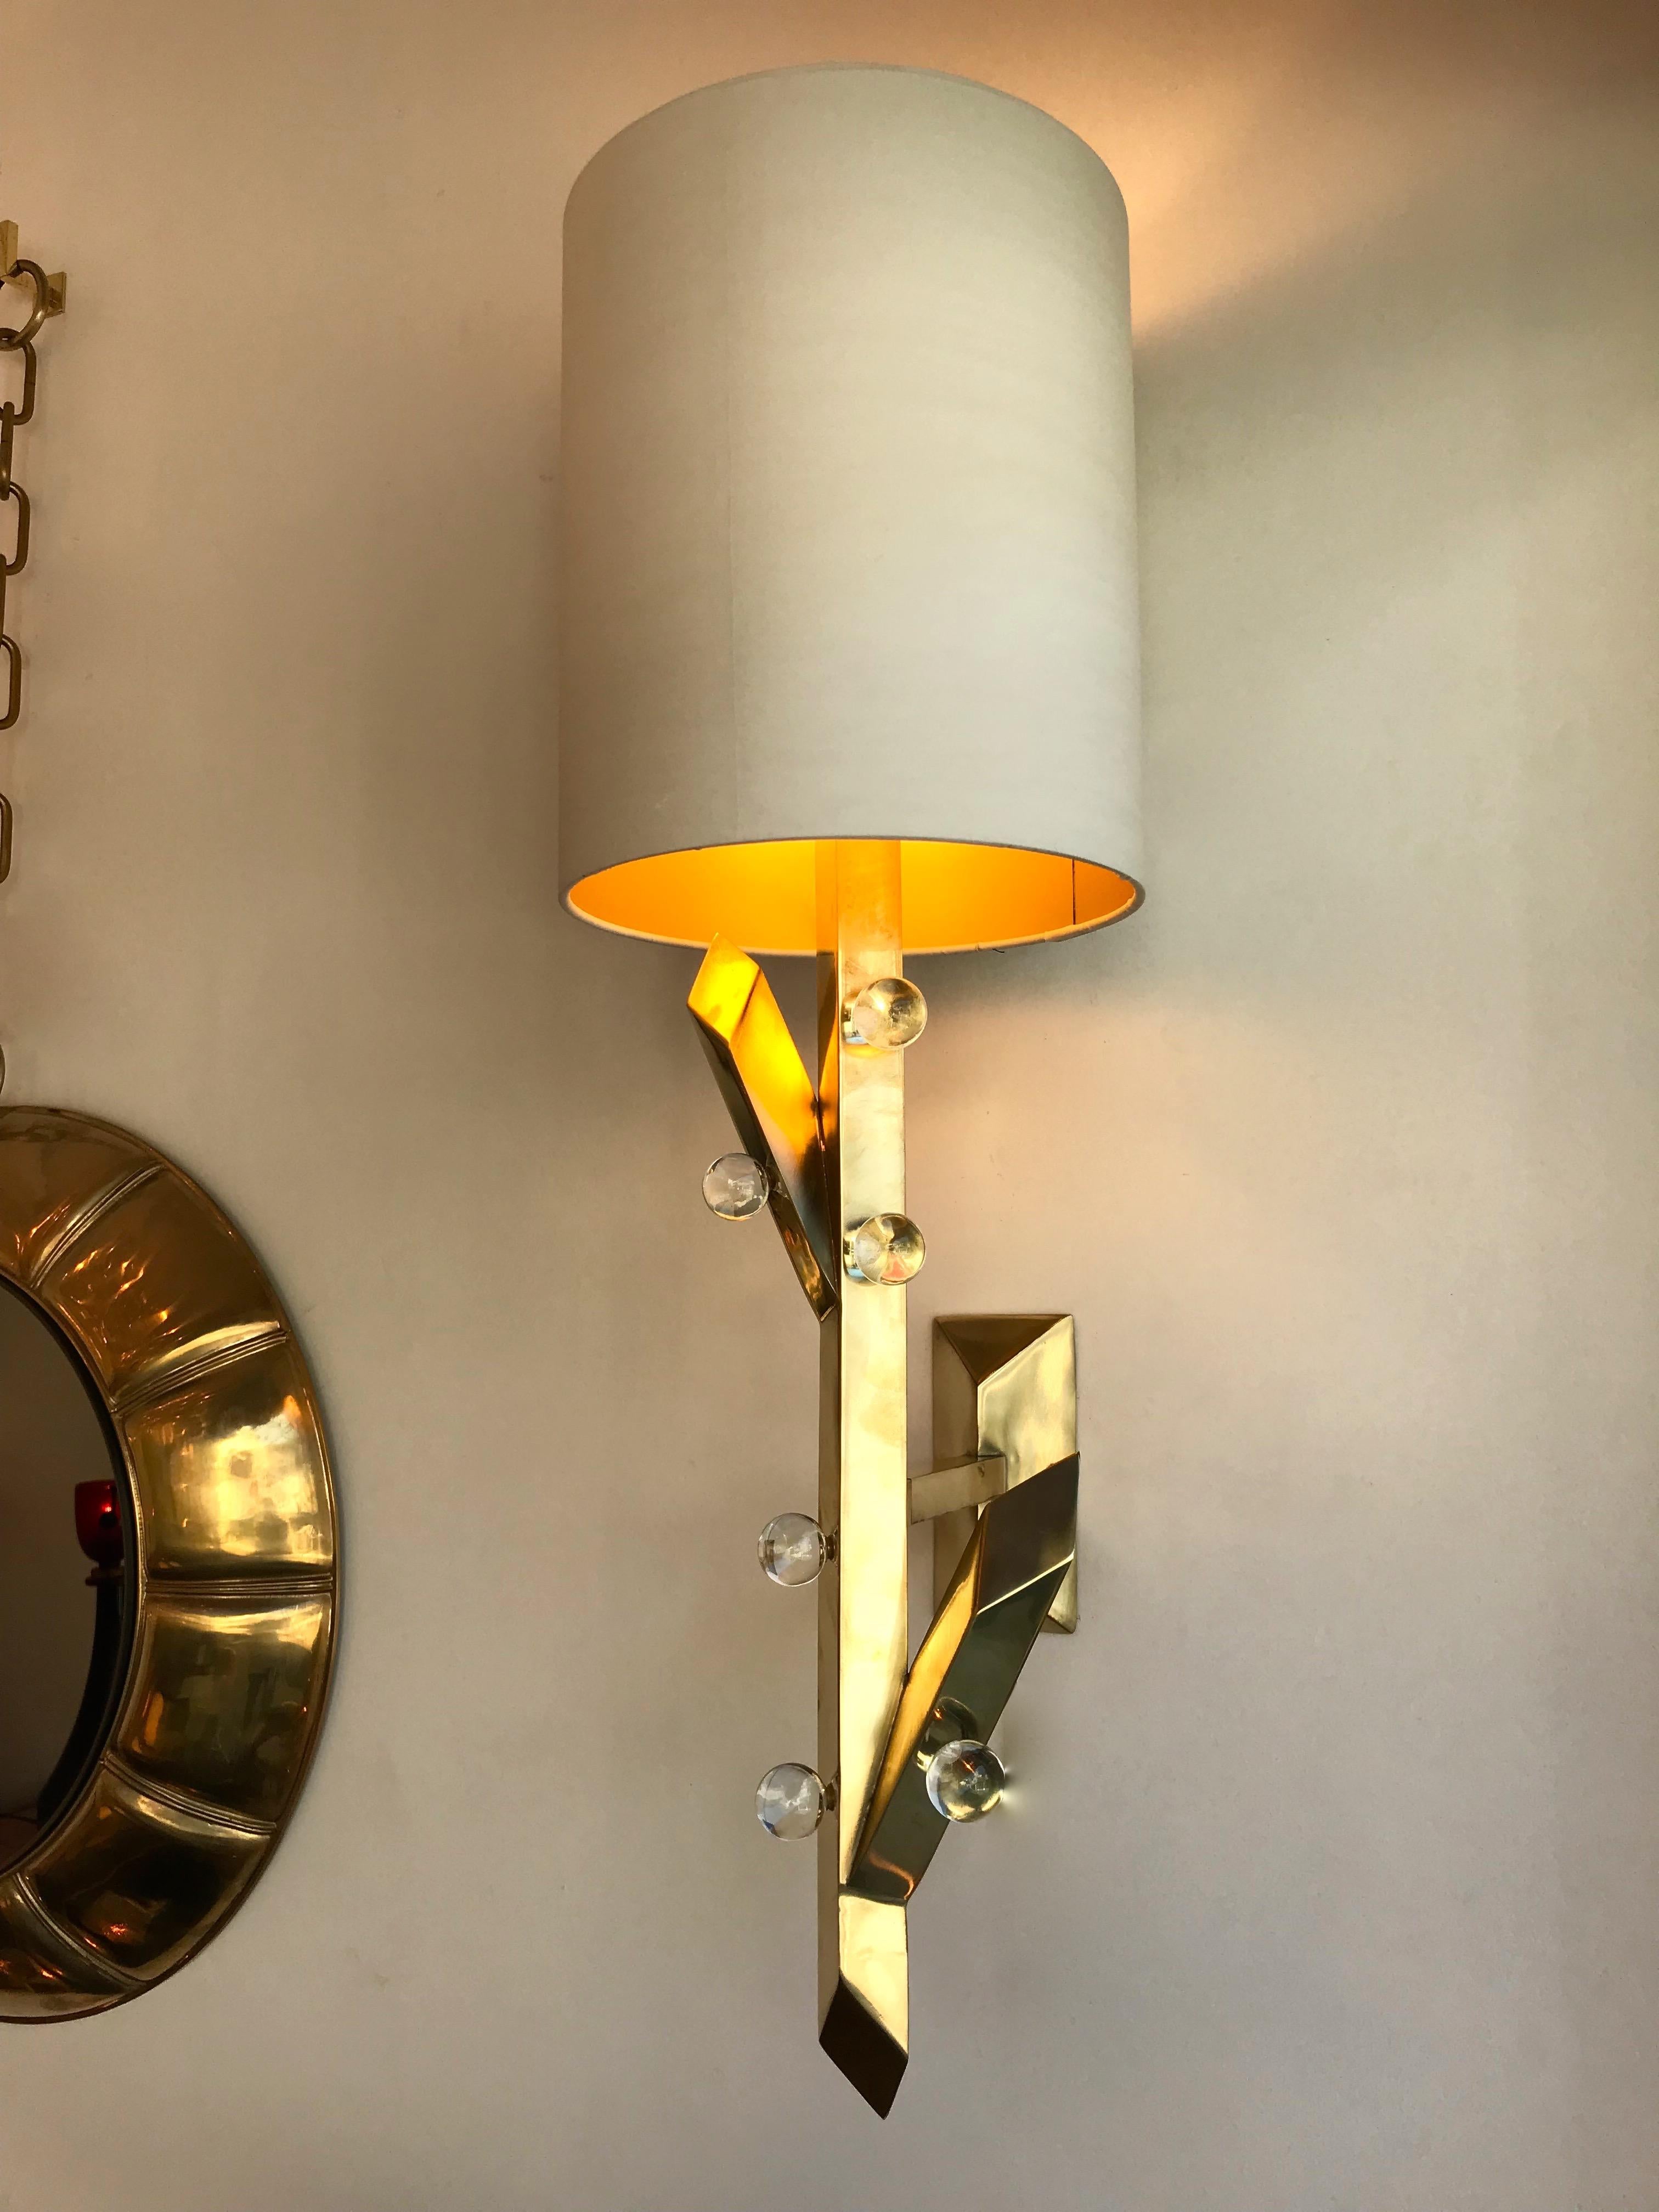 Very decorative contemporary pair of brass and clear Murano glass ball sconces. Plant style. Nice shade with gold interior. Small artisanal production from an Italian workshop.